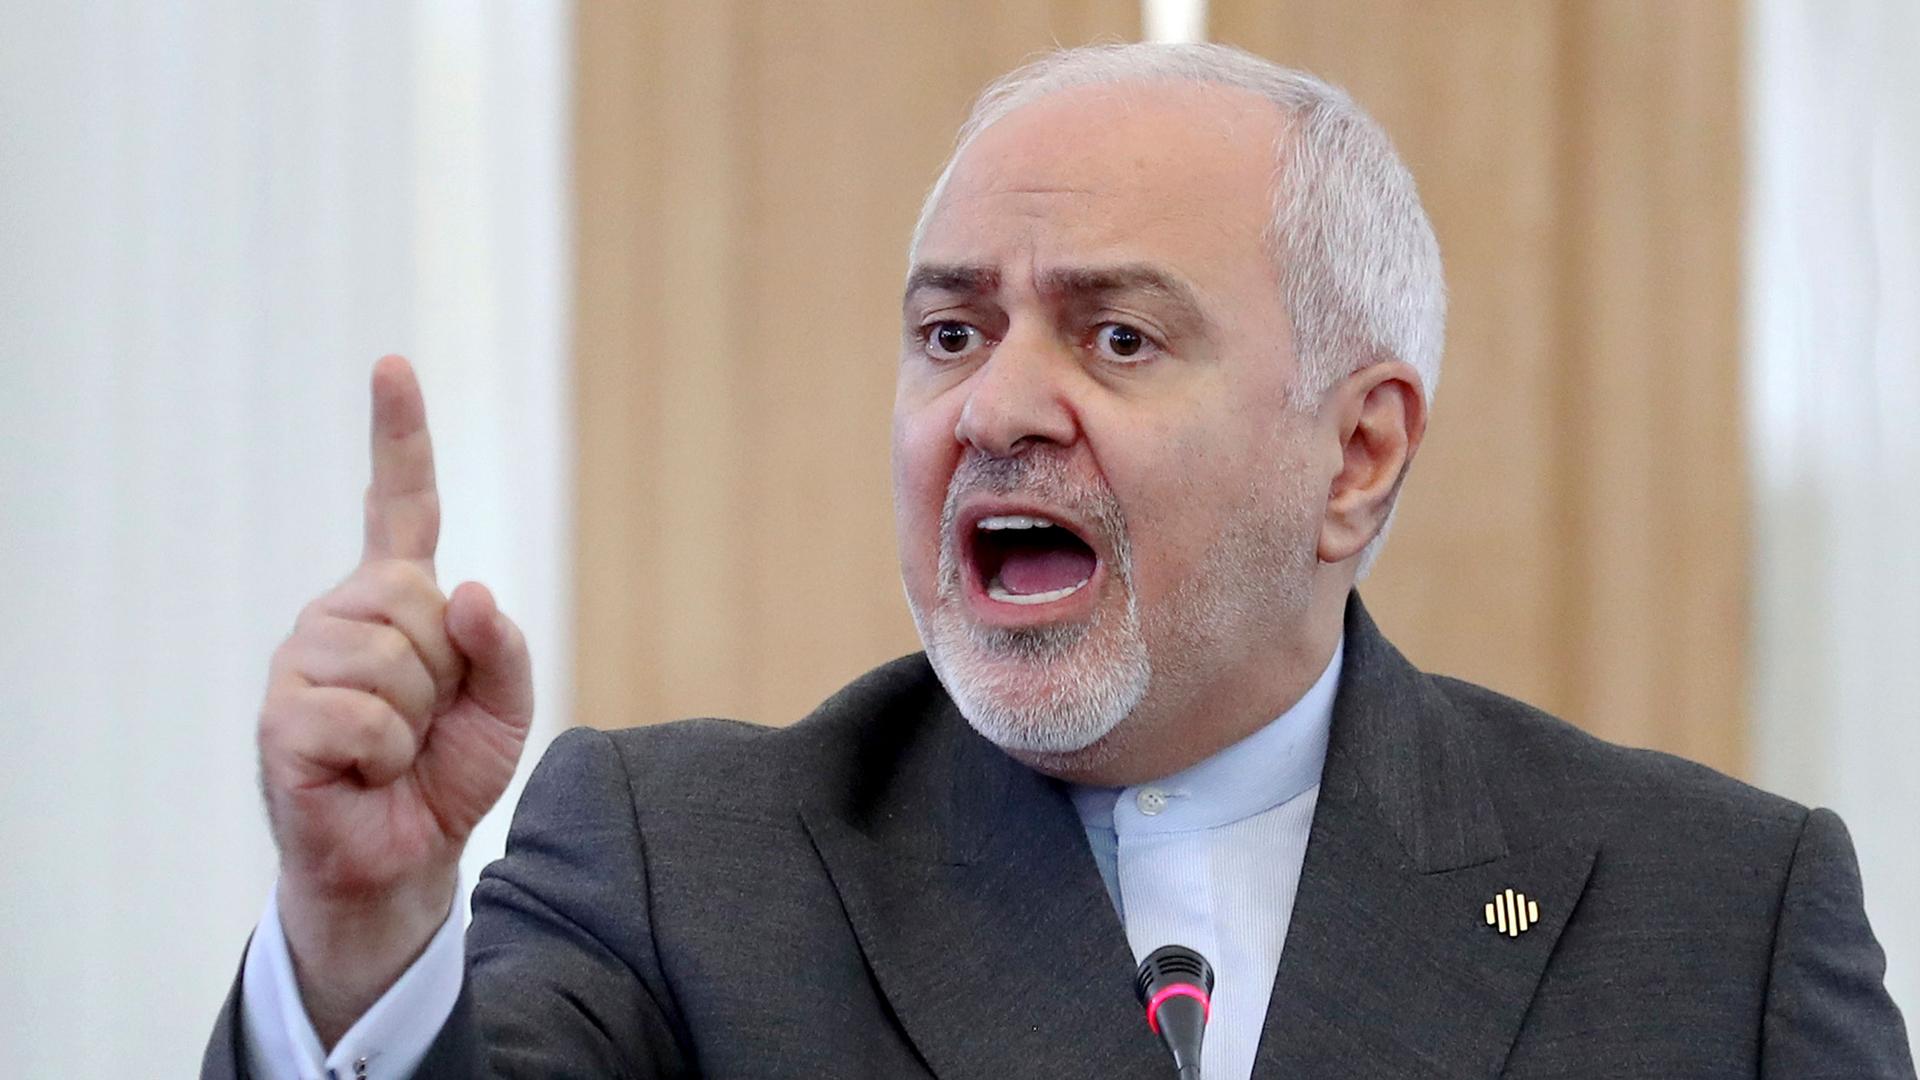 Iranian Foreign Minister Mohammad Javad Zarif is shown speaking and with his right hand rised and point his finger in the air.